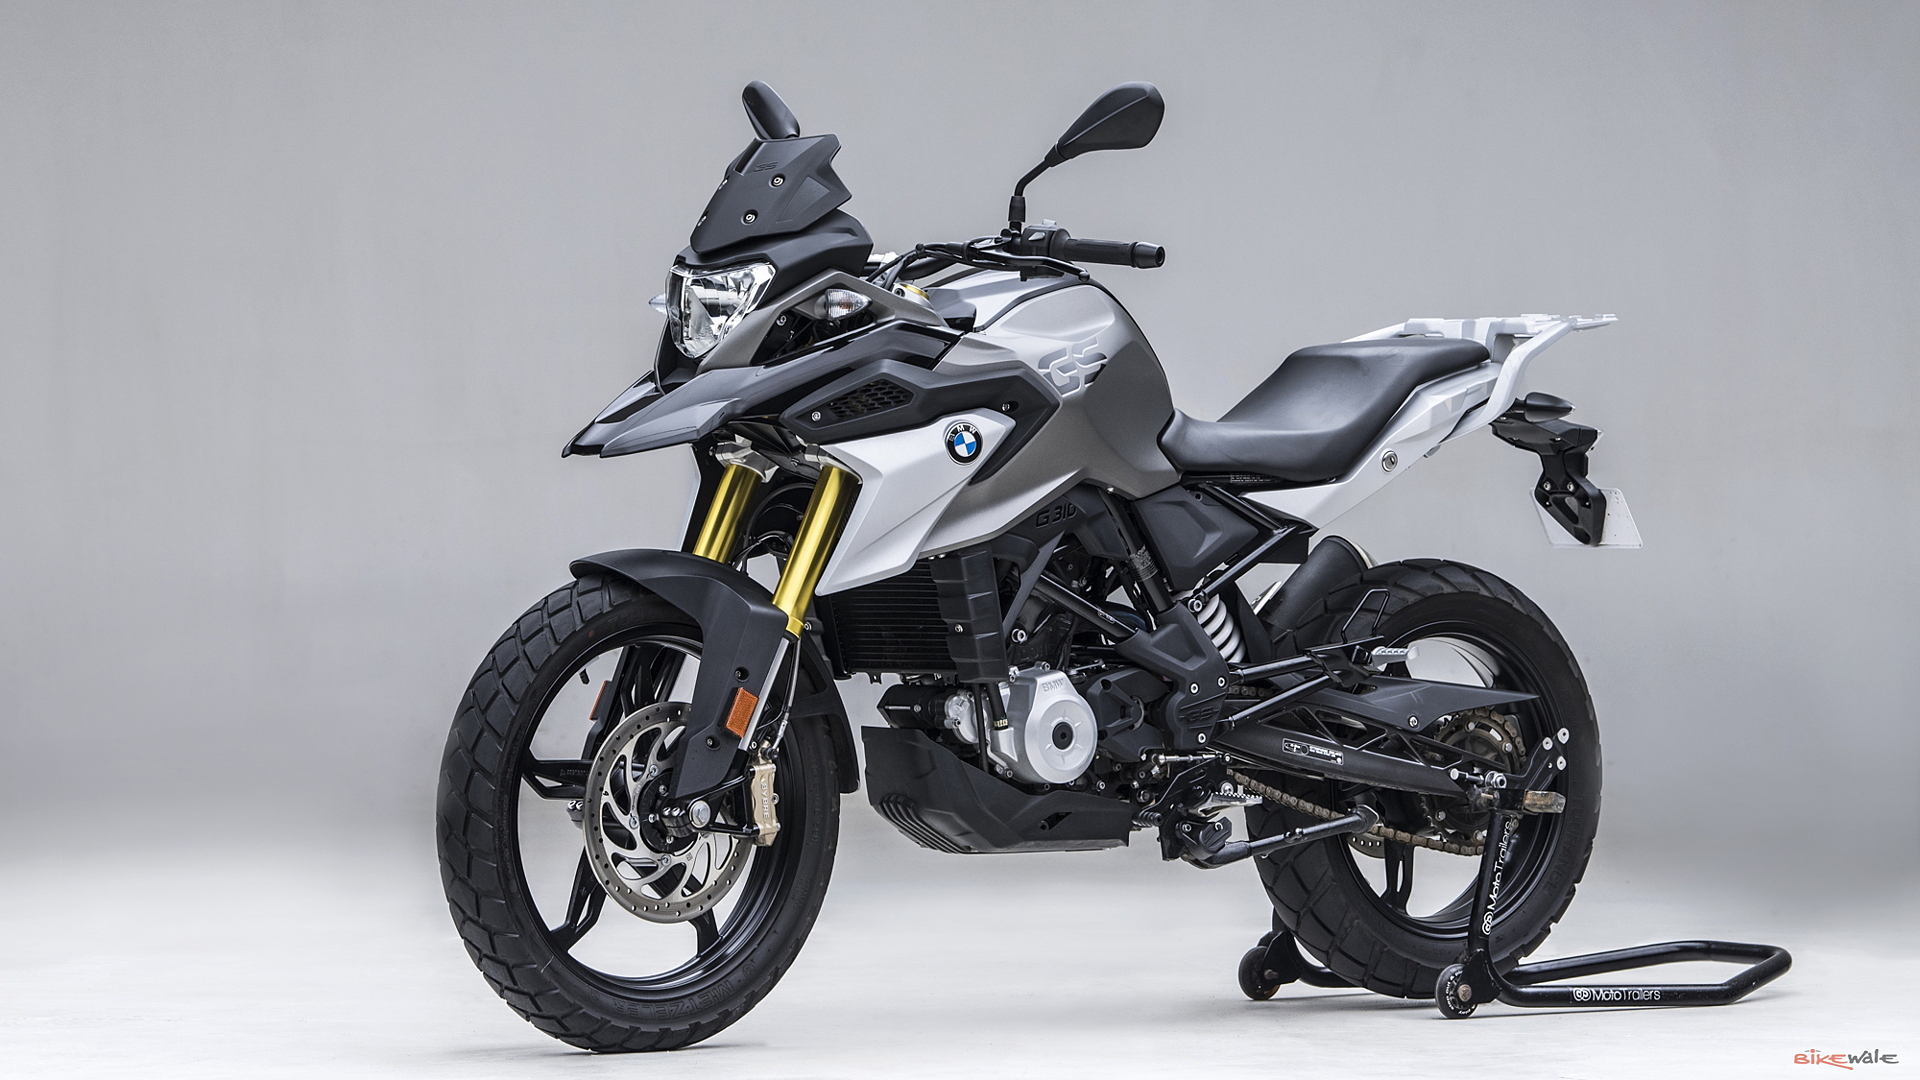 Bmw G310gs 18 19 Cosmic Black Colour G310gs 18 19 Colours In India Bikewale